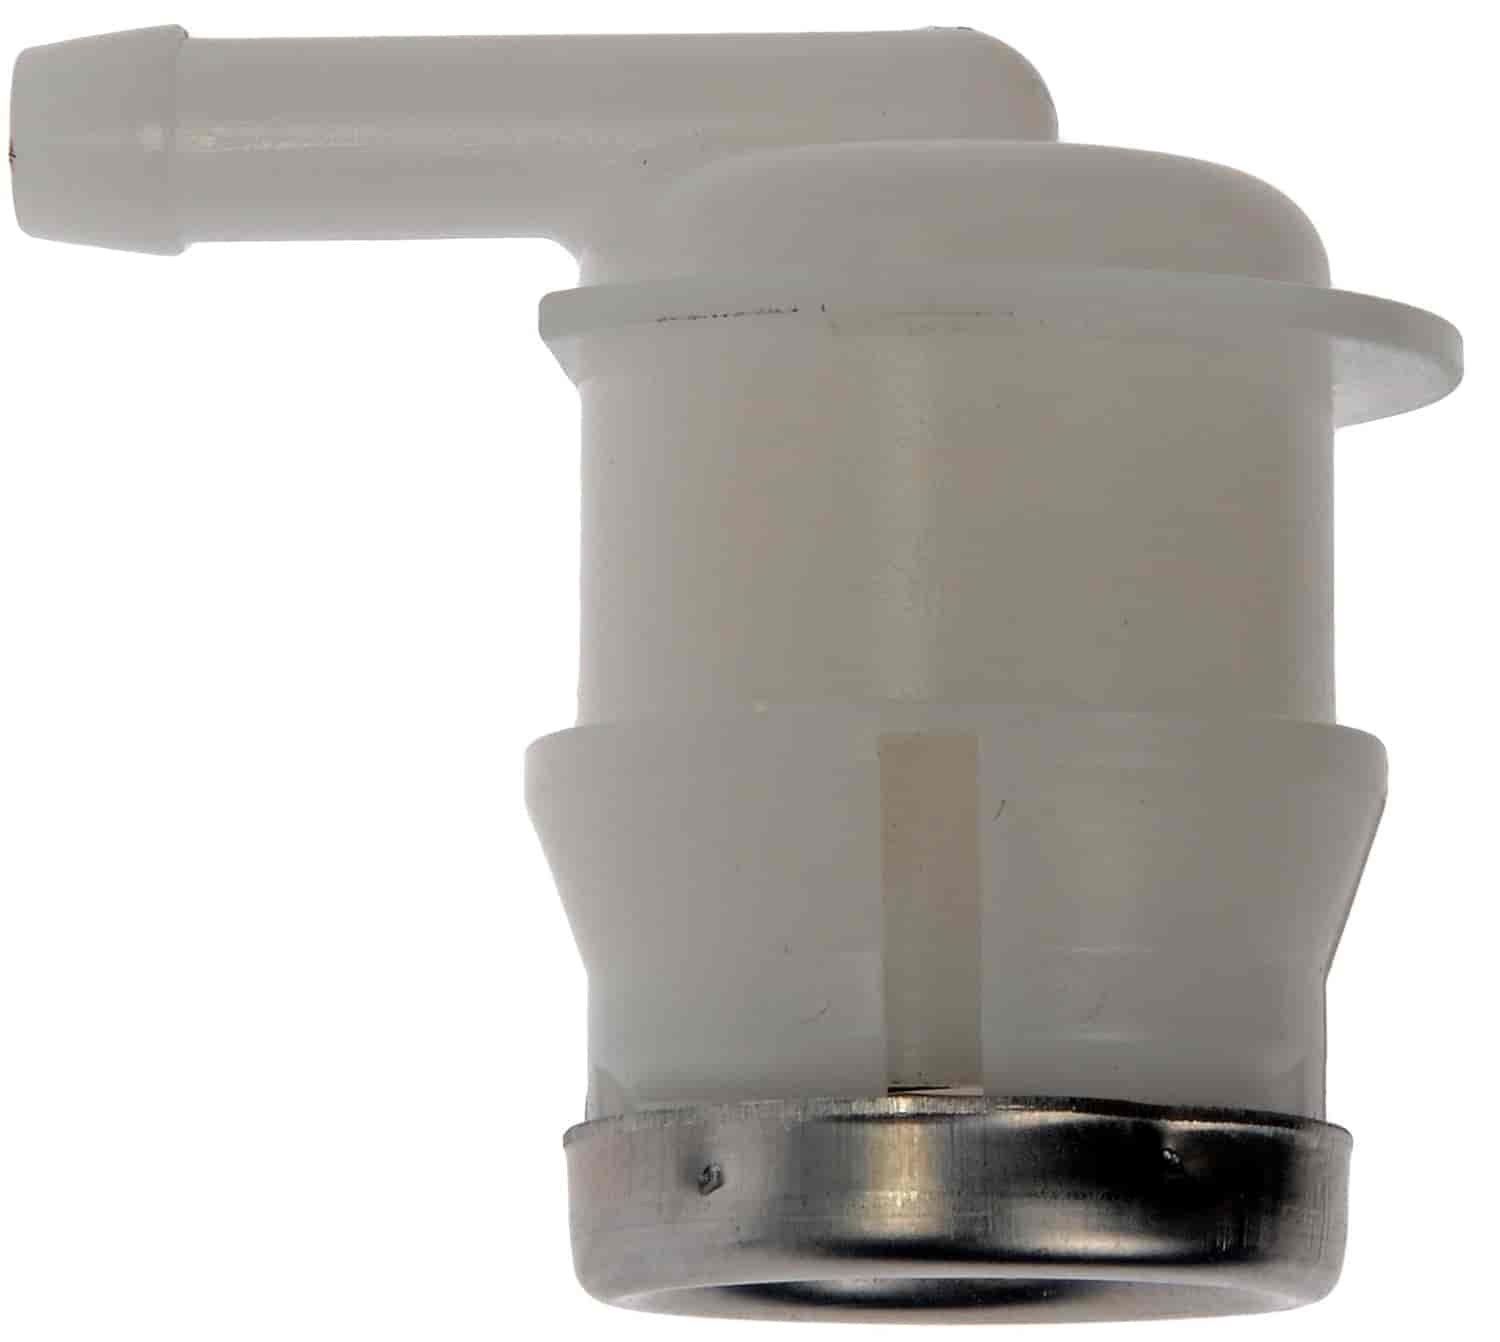 Fuel Tank Vent Rollover Valve for 1972-1999 Chrysler, Dodge, Eagle, Ford, Jeep, Lincoln, Mercury, Plymouth Vehicles